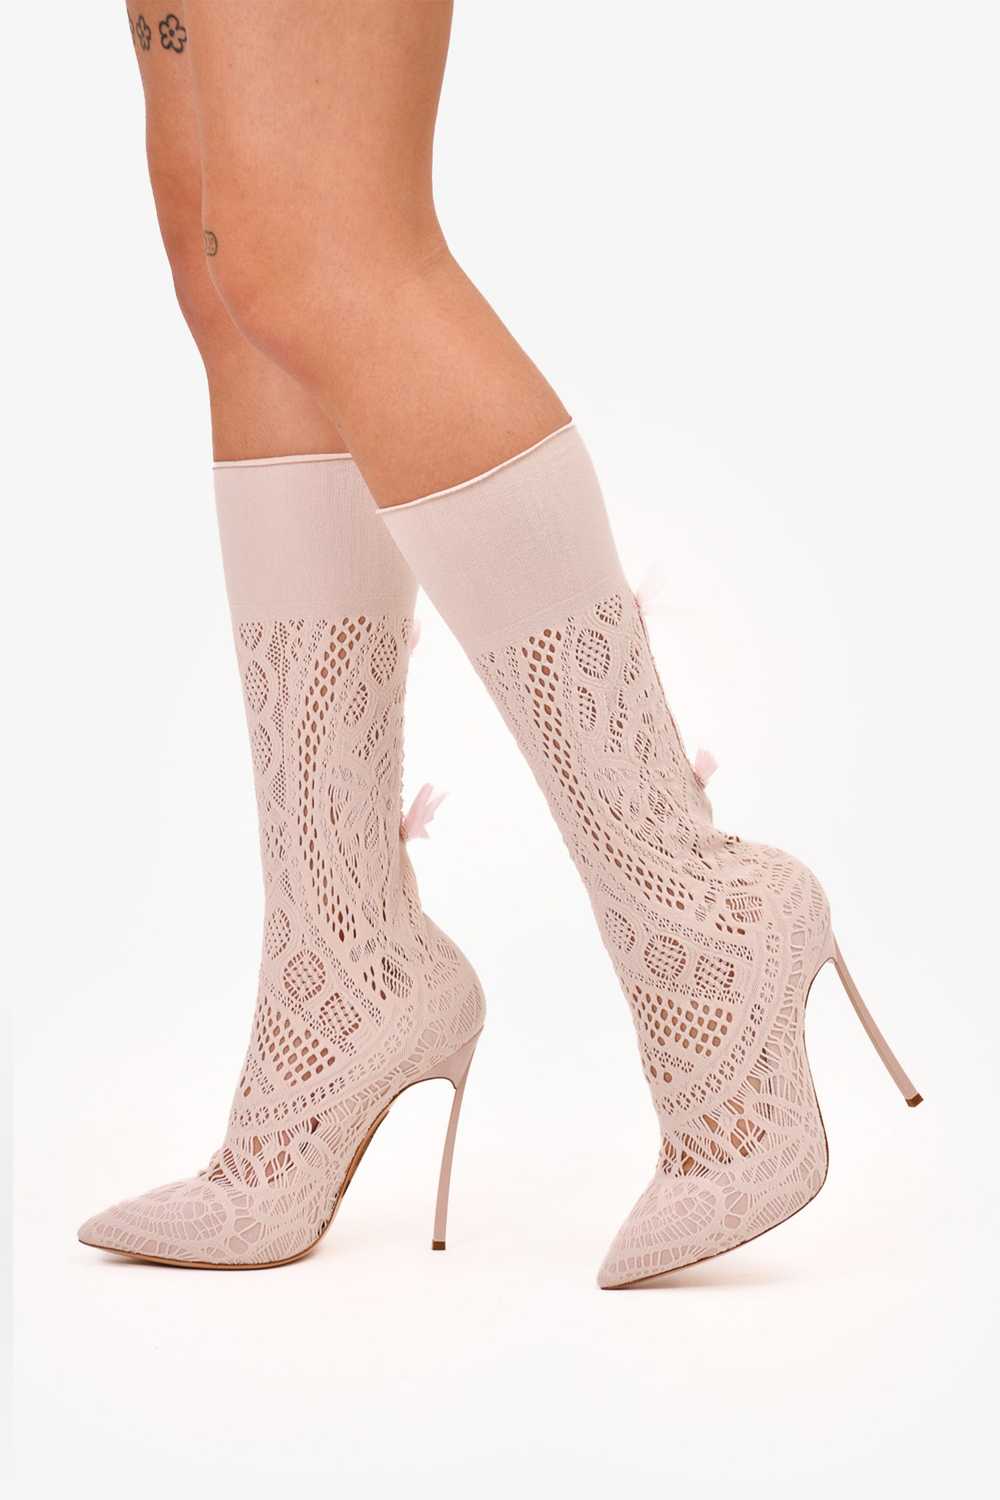 Casadei Pink Ribbon Detailed Sock Style Ankle Boo… - image 2